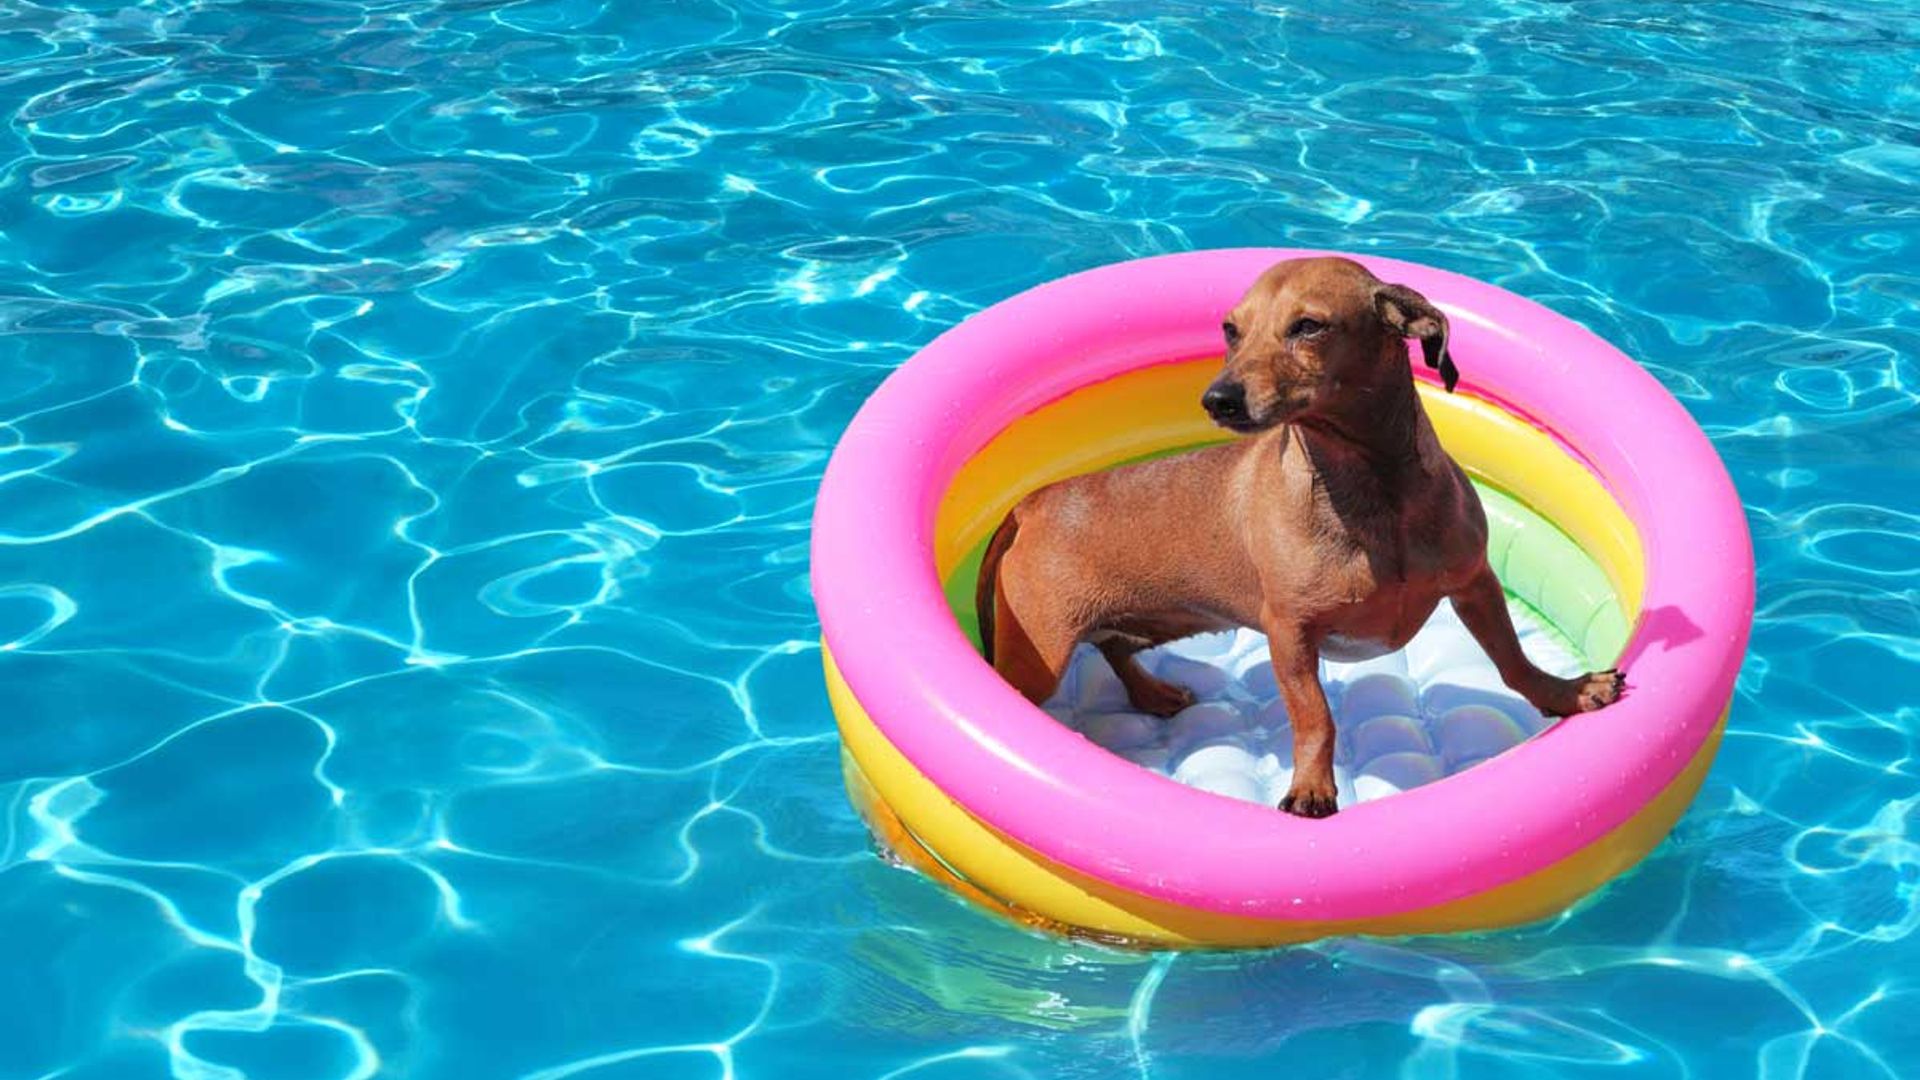 Dog paddling pools are trending during the heatwave - this one has over 1000 positive reviews